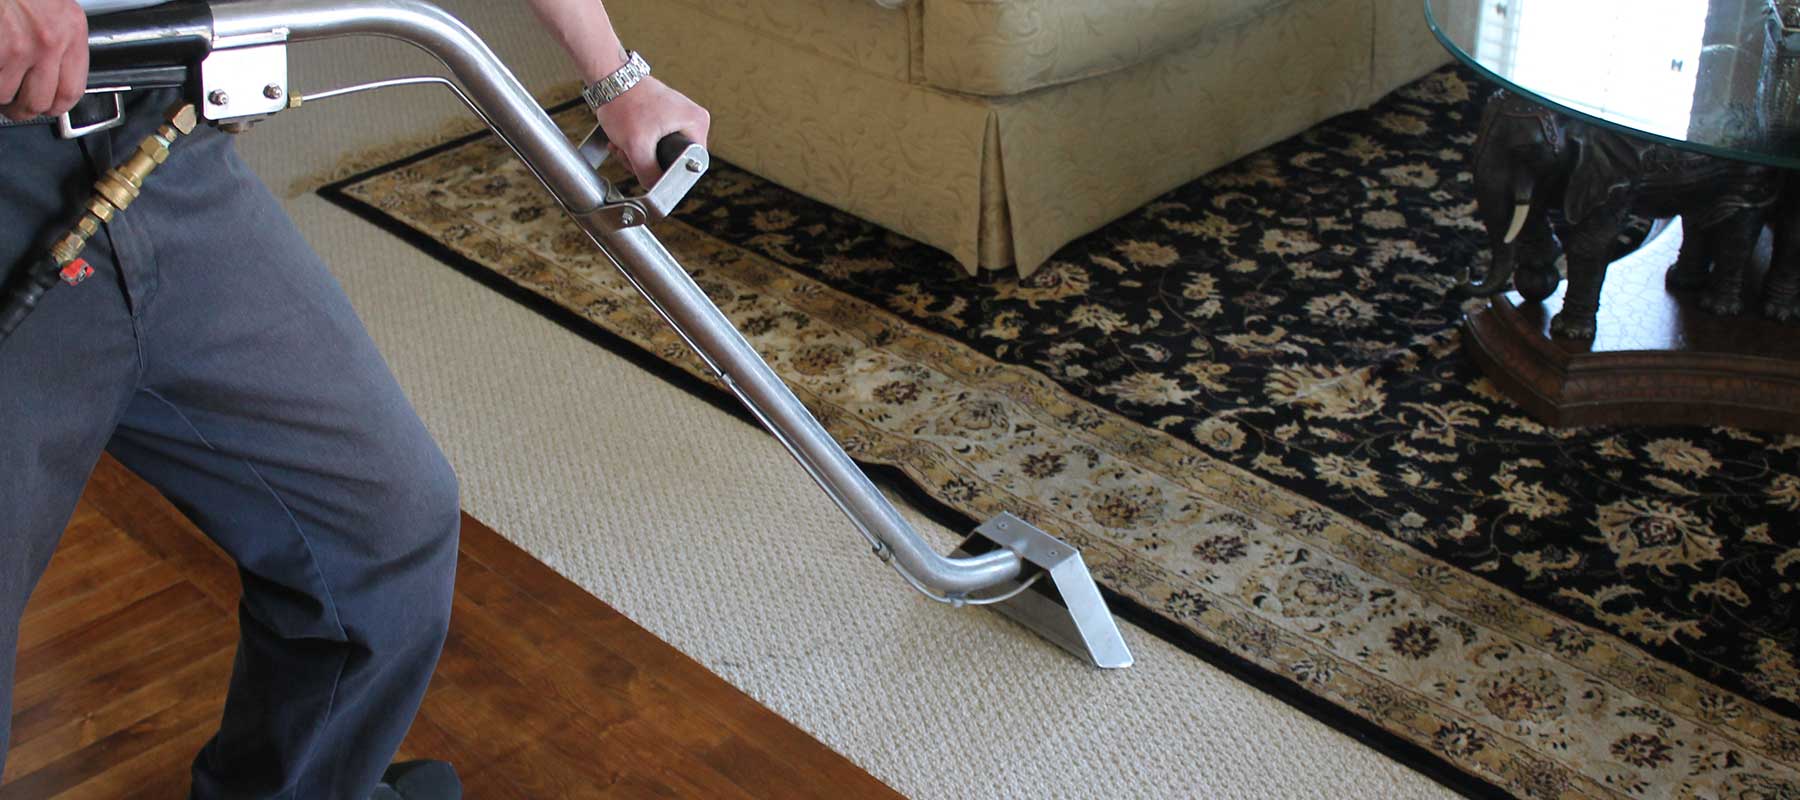 Living Room Carpet Cleaning Service